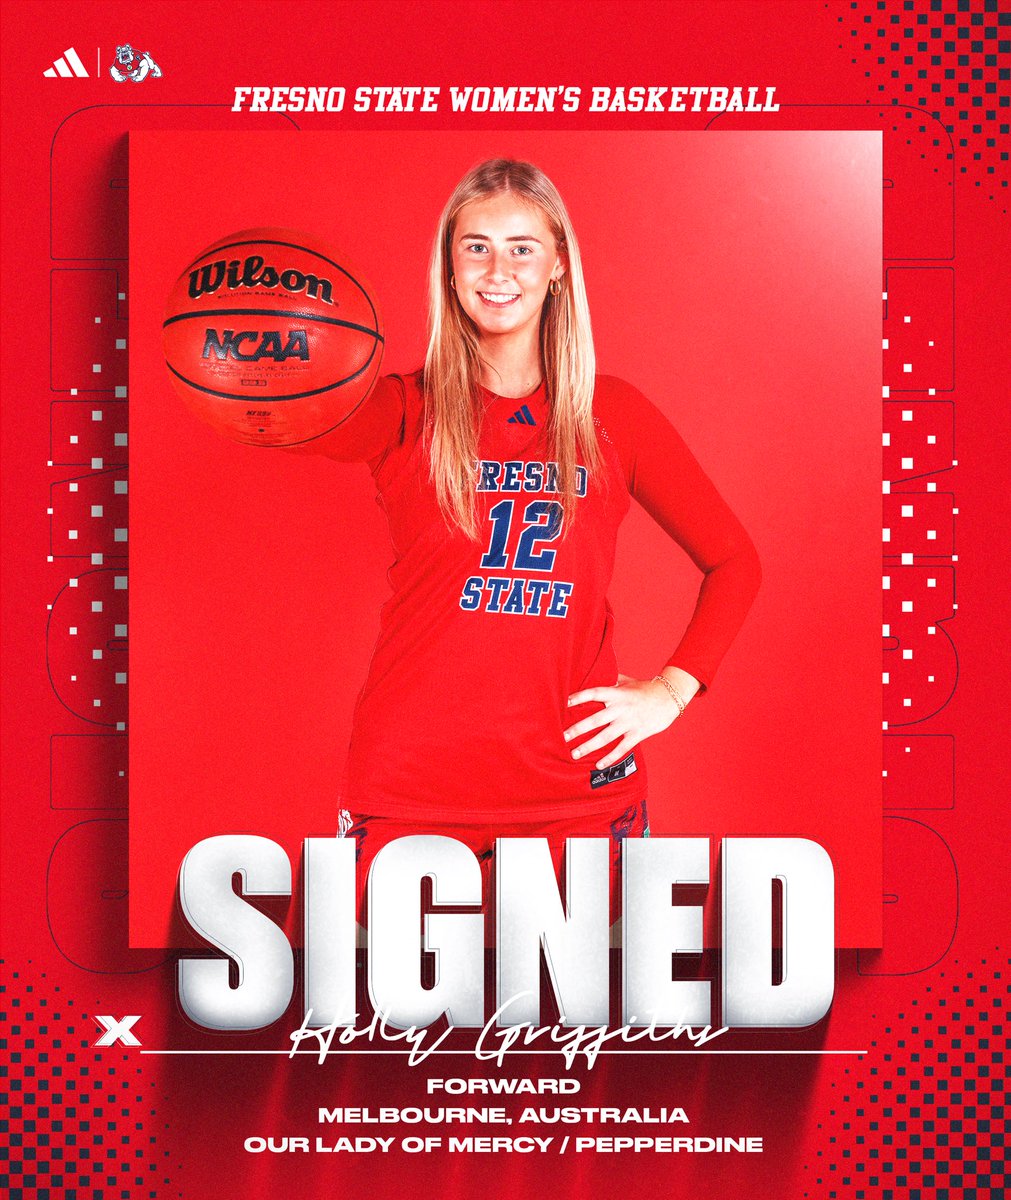 𝙎𝙄𝙂𝙉𝙀𝘿 🖊️ It's official, welcome to the Bulldog family Holly! 🐾